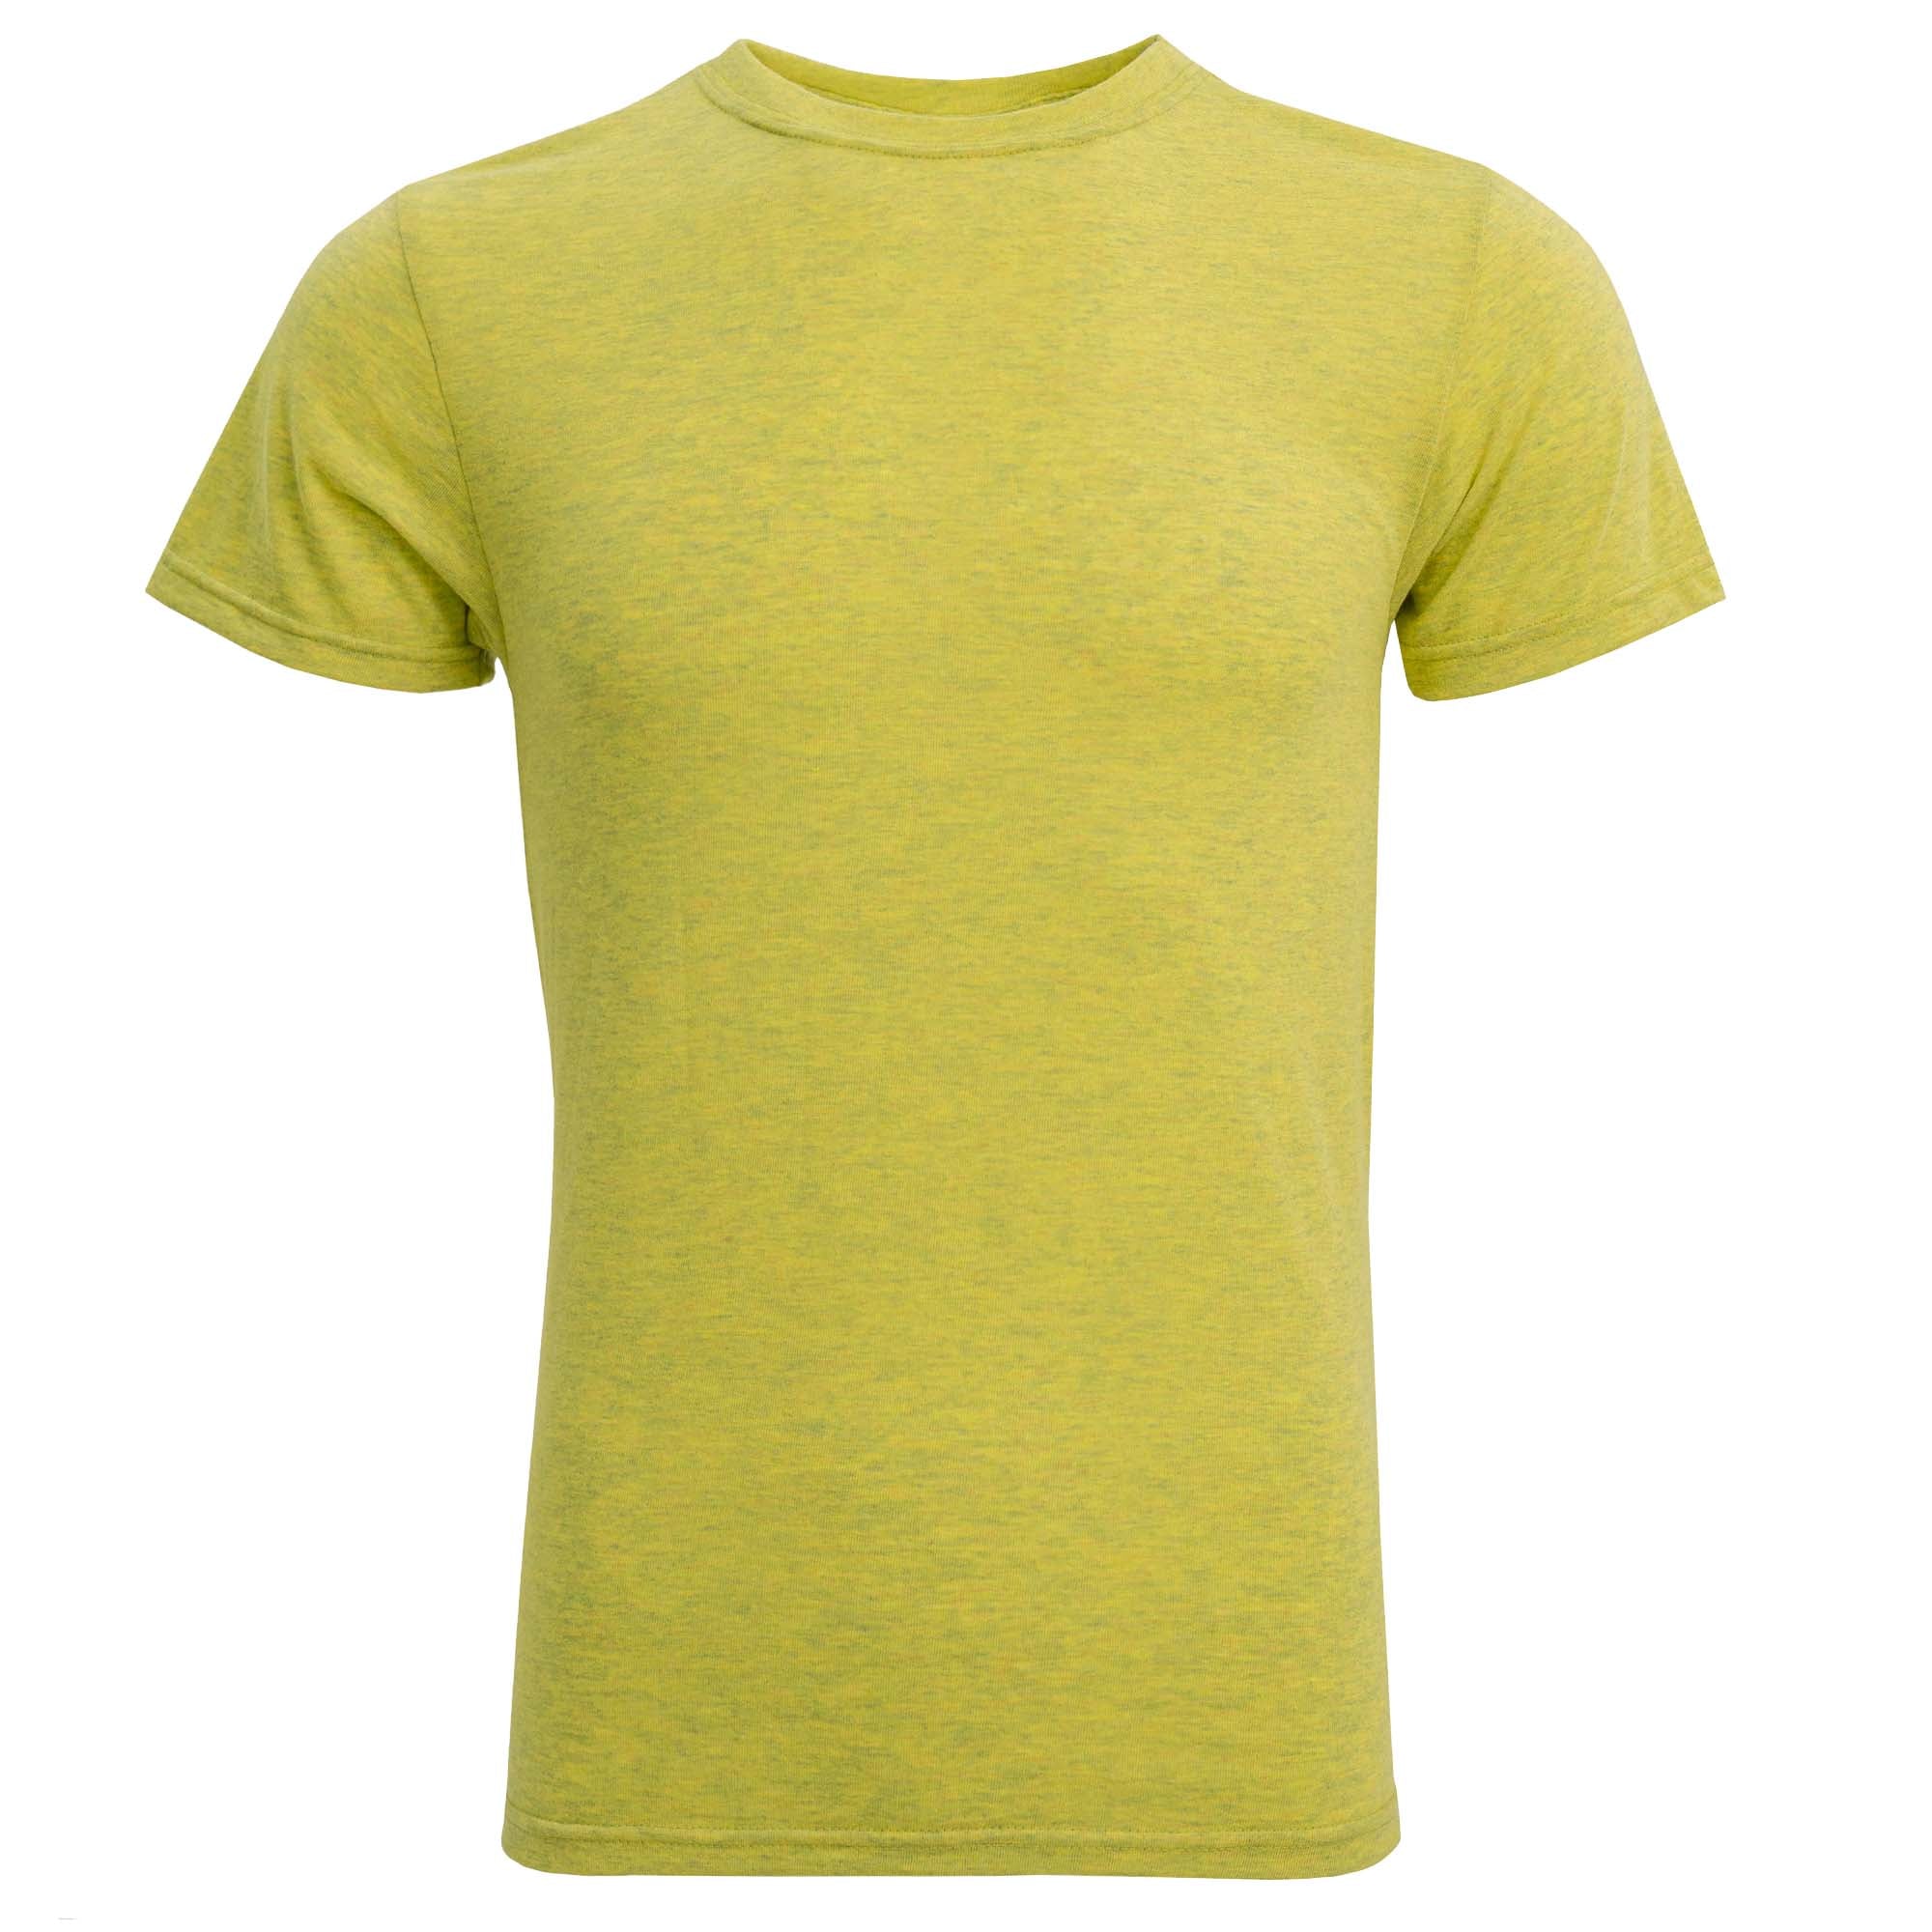 Eco-Friendly T-Shirt | Sustainable Apparel | Men's Shirts | Recover Grass / M